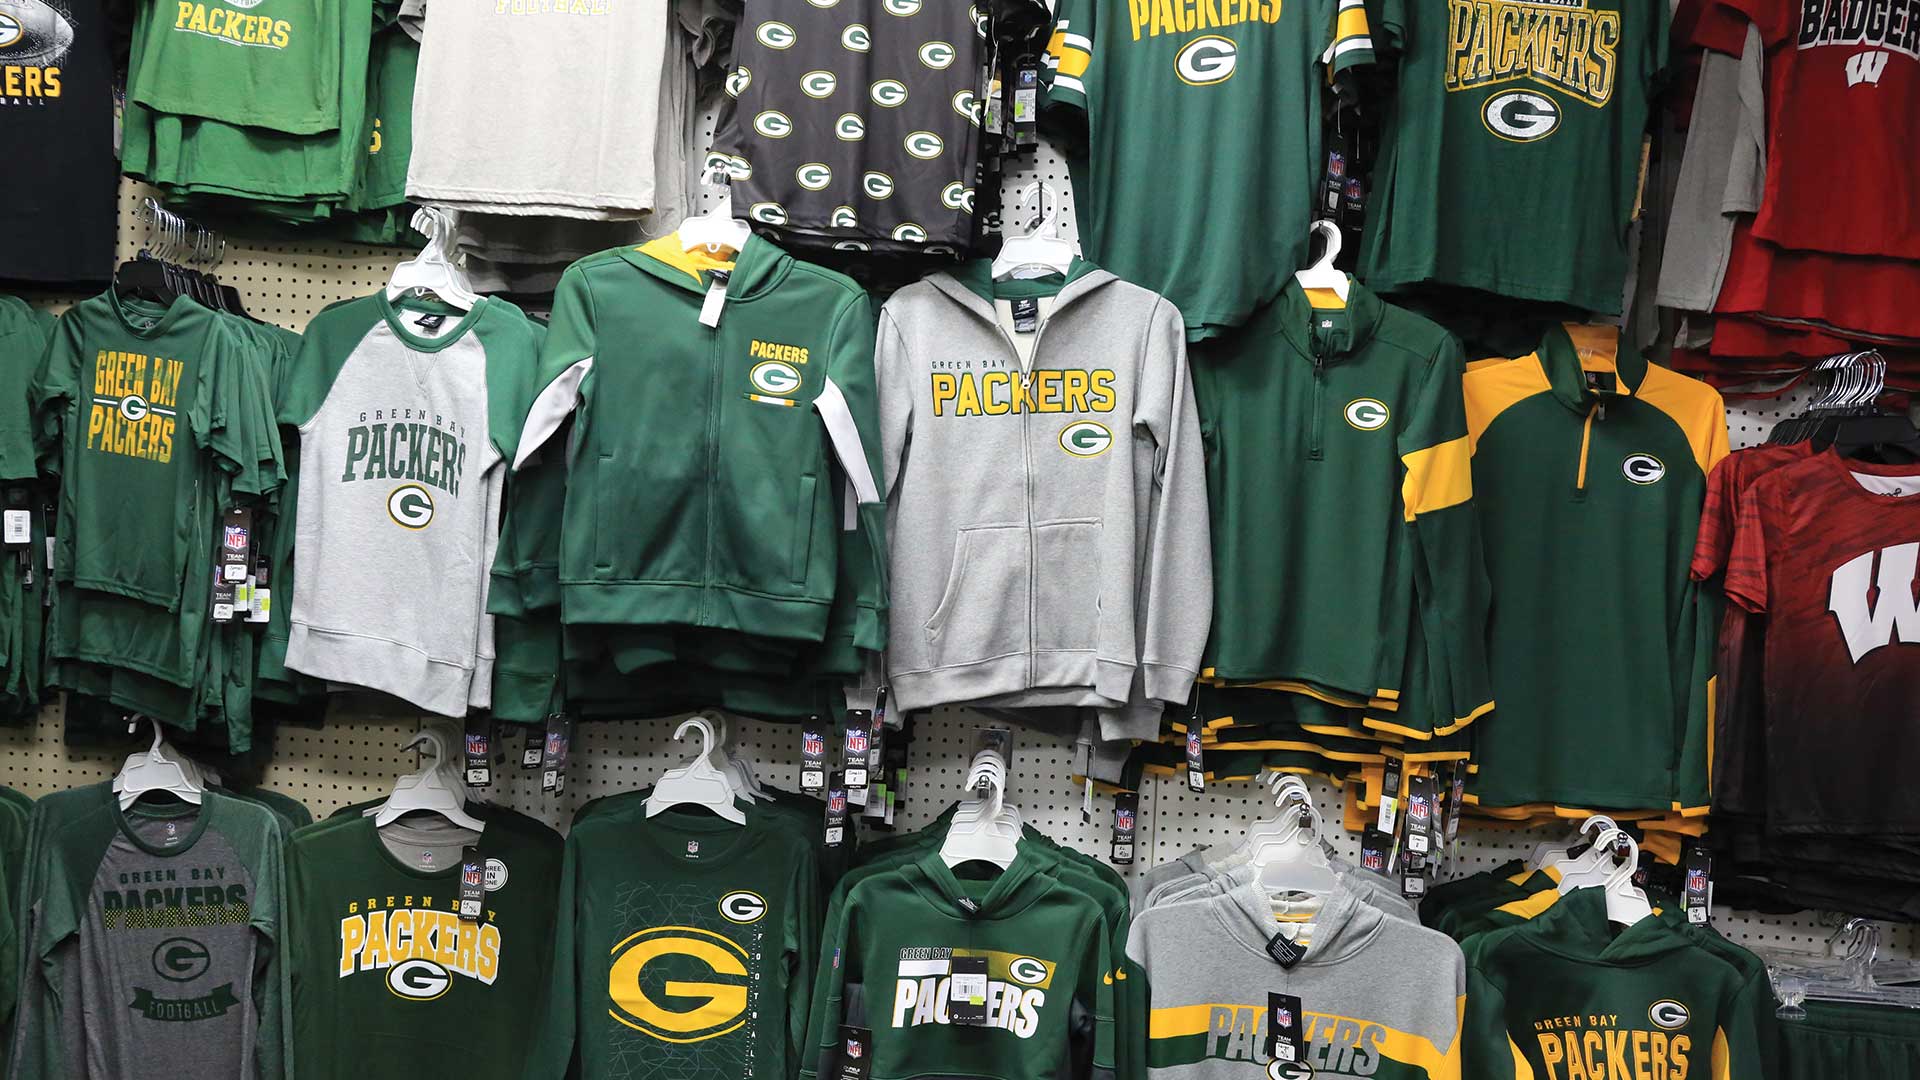 Packers gear on display